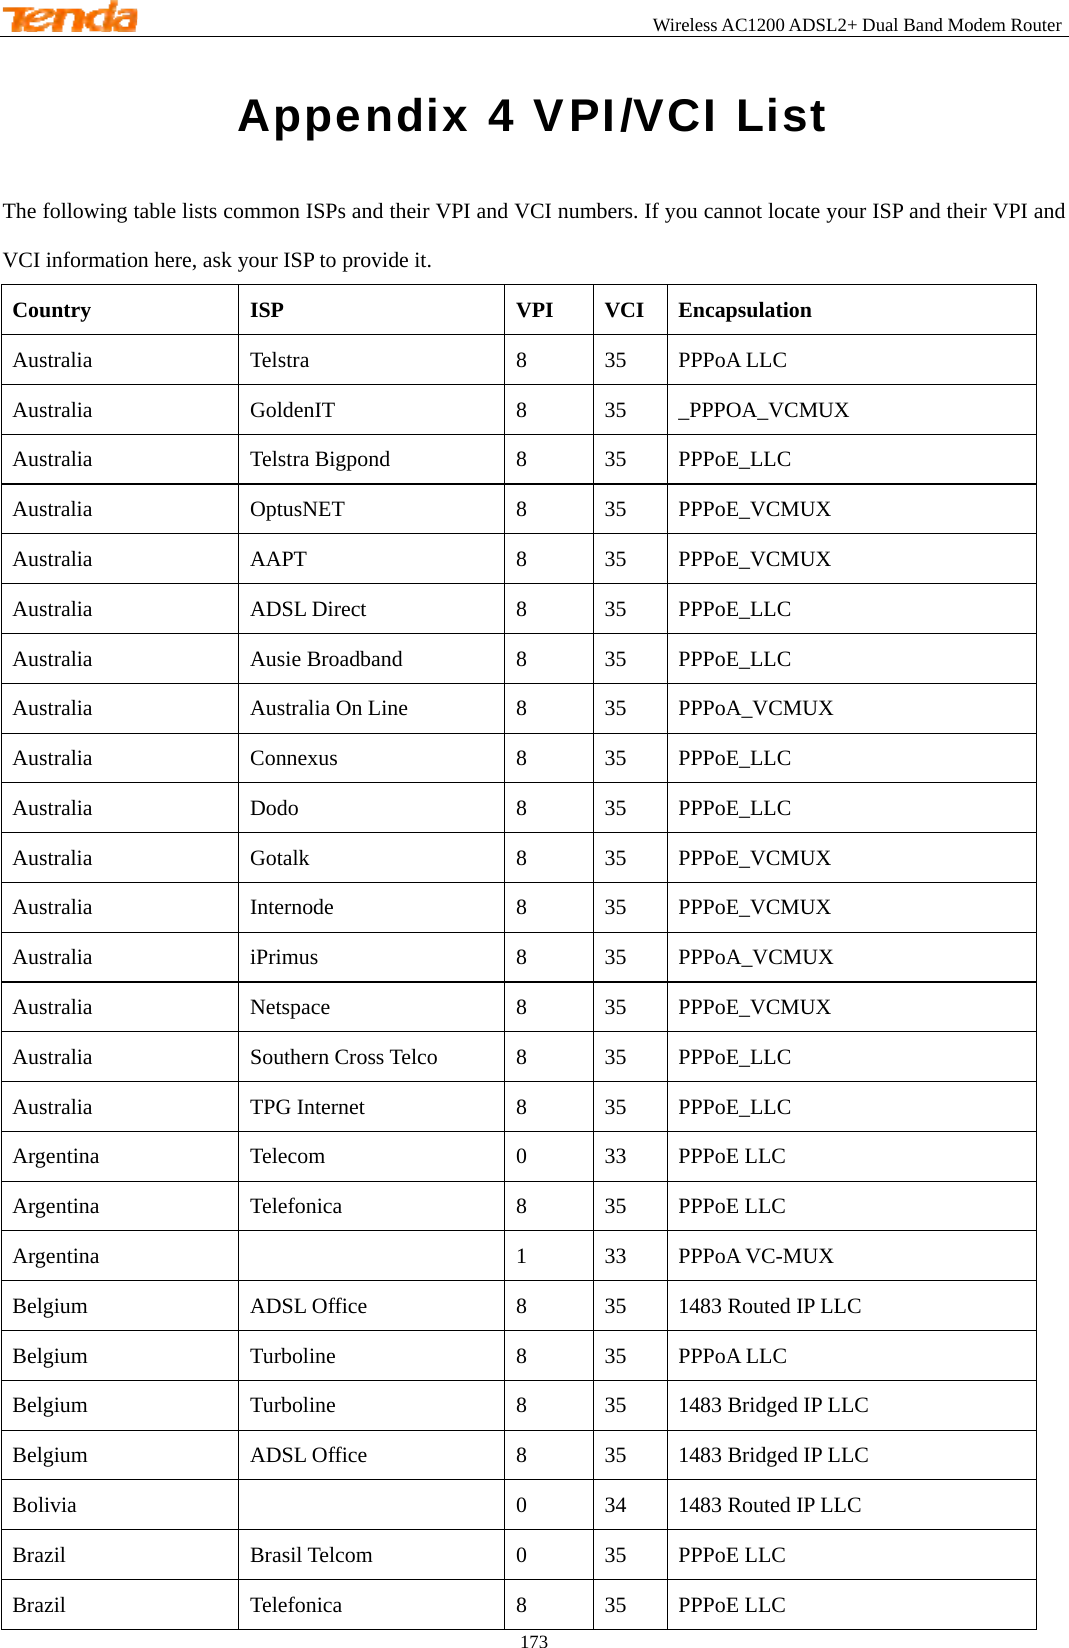                                                        Wireless AC1200 ADSL2+ Dual Band Modem Router 173  Appendix 4 VPI/VCI List The following table lists common ISPs and their VPI and VCI numbers. If you cannot locate your ISP and their VPI and VCI information here, ask your ISP to provide it. Country  ISP   VPI  VCI  Encapsulation Australia  Telstra  8  35  PPPoA LLC Australia   GoldenIT  8  35  _PPPOA_VCMUX Australia   Telstra Bigpond  8  35  PPPoE_LLC Australia  OptusNET  8  35  PPPoE_VCMUX Australia   AAPT  8  35  PPPoE_VCMUX Australia   ADSL Direct  8  35  PPPoE_LLC Australia   Ausie Broadband  8  35  PPPoE_LLC Australia   Australia On Line  8  35  PPPoA_VCMUX Australia   Connexus  8  35  PPPoE_LLC Australia   Dodo  8  35  PPPoE_LLC Australia  Gotalk  8  35  PPPoE_VCMUX Australia   Internode  8  35  PPPoE_VCMUX Australia   iPrimus  8  35  PPPoA_VCMUX Australia   Netspace  8  35  PPPoE_VCMUX Australia   Southern Cross Telco  8  35  PPPoE_LLC Australia   TPG Internet  8  35  PPPoE_LLC Argentina  Telecom  0  33  PPPoE LLC Argentina   Telefonica  8  35  PPPoE LLC Argentina    1  33  PPPoA VC-MUX Belgium  ADSL Office  8  35  1483 Routed IP LLC Belgium  Turboline  8  35  PPPoA LLC Belgium   Turboline  8  35  1483 Bridged IP LLC Belgium   ADSL Office  8  35  1483 Bridged IP LLC Bolivia    0  34  1483 Routed IP LLC Brazil   Brasil Telcom  0  35  PPPoE LLC Brazil   Telefonica  8  35  PPPoE LLC 